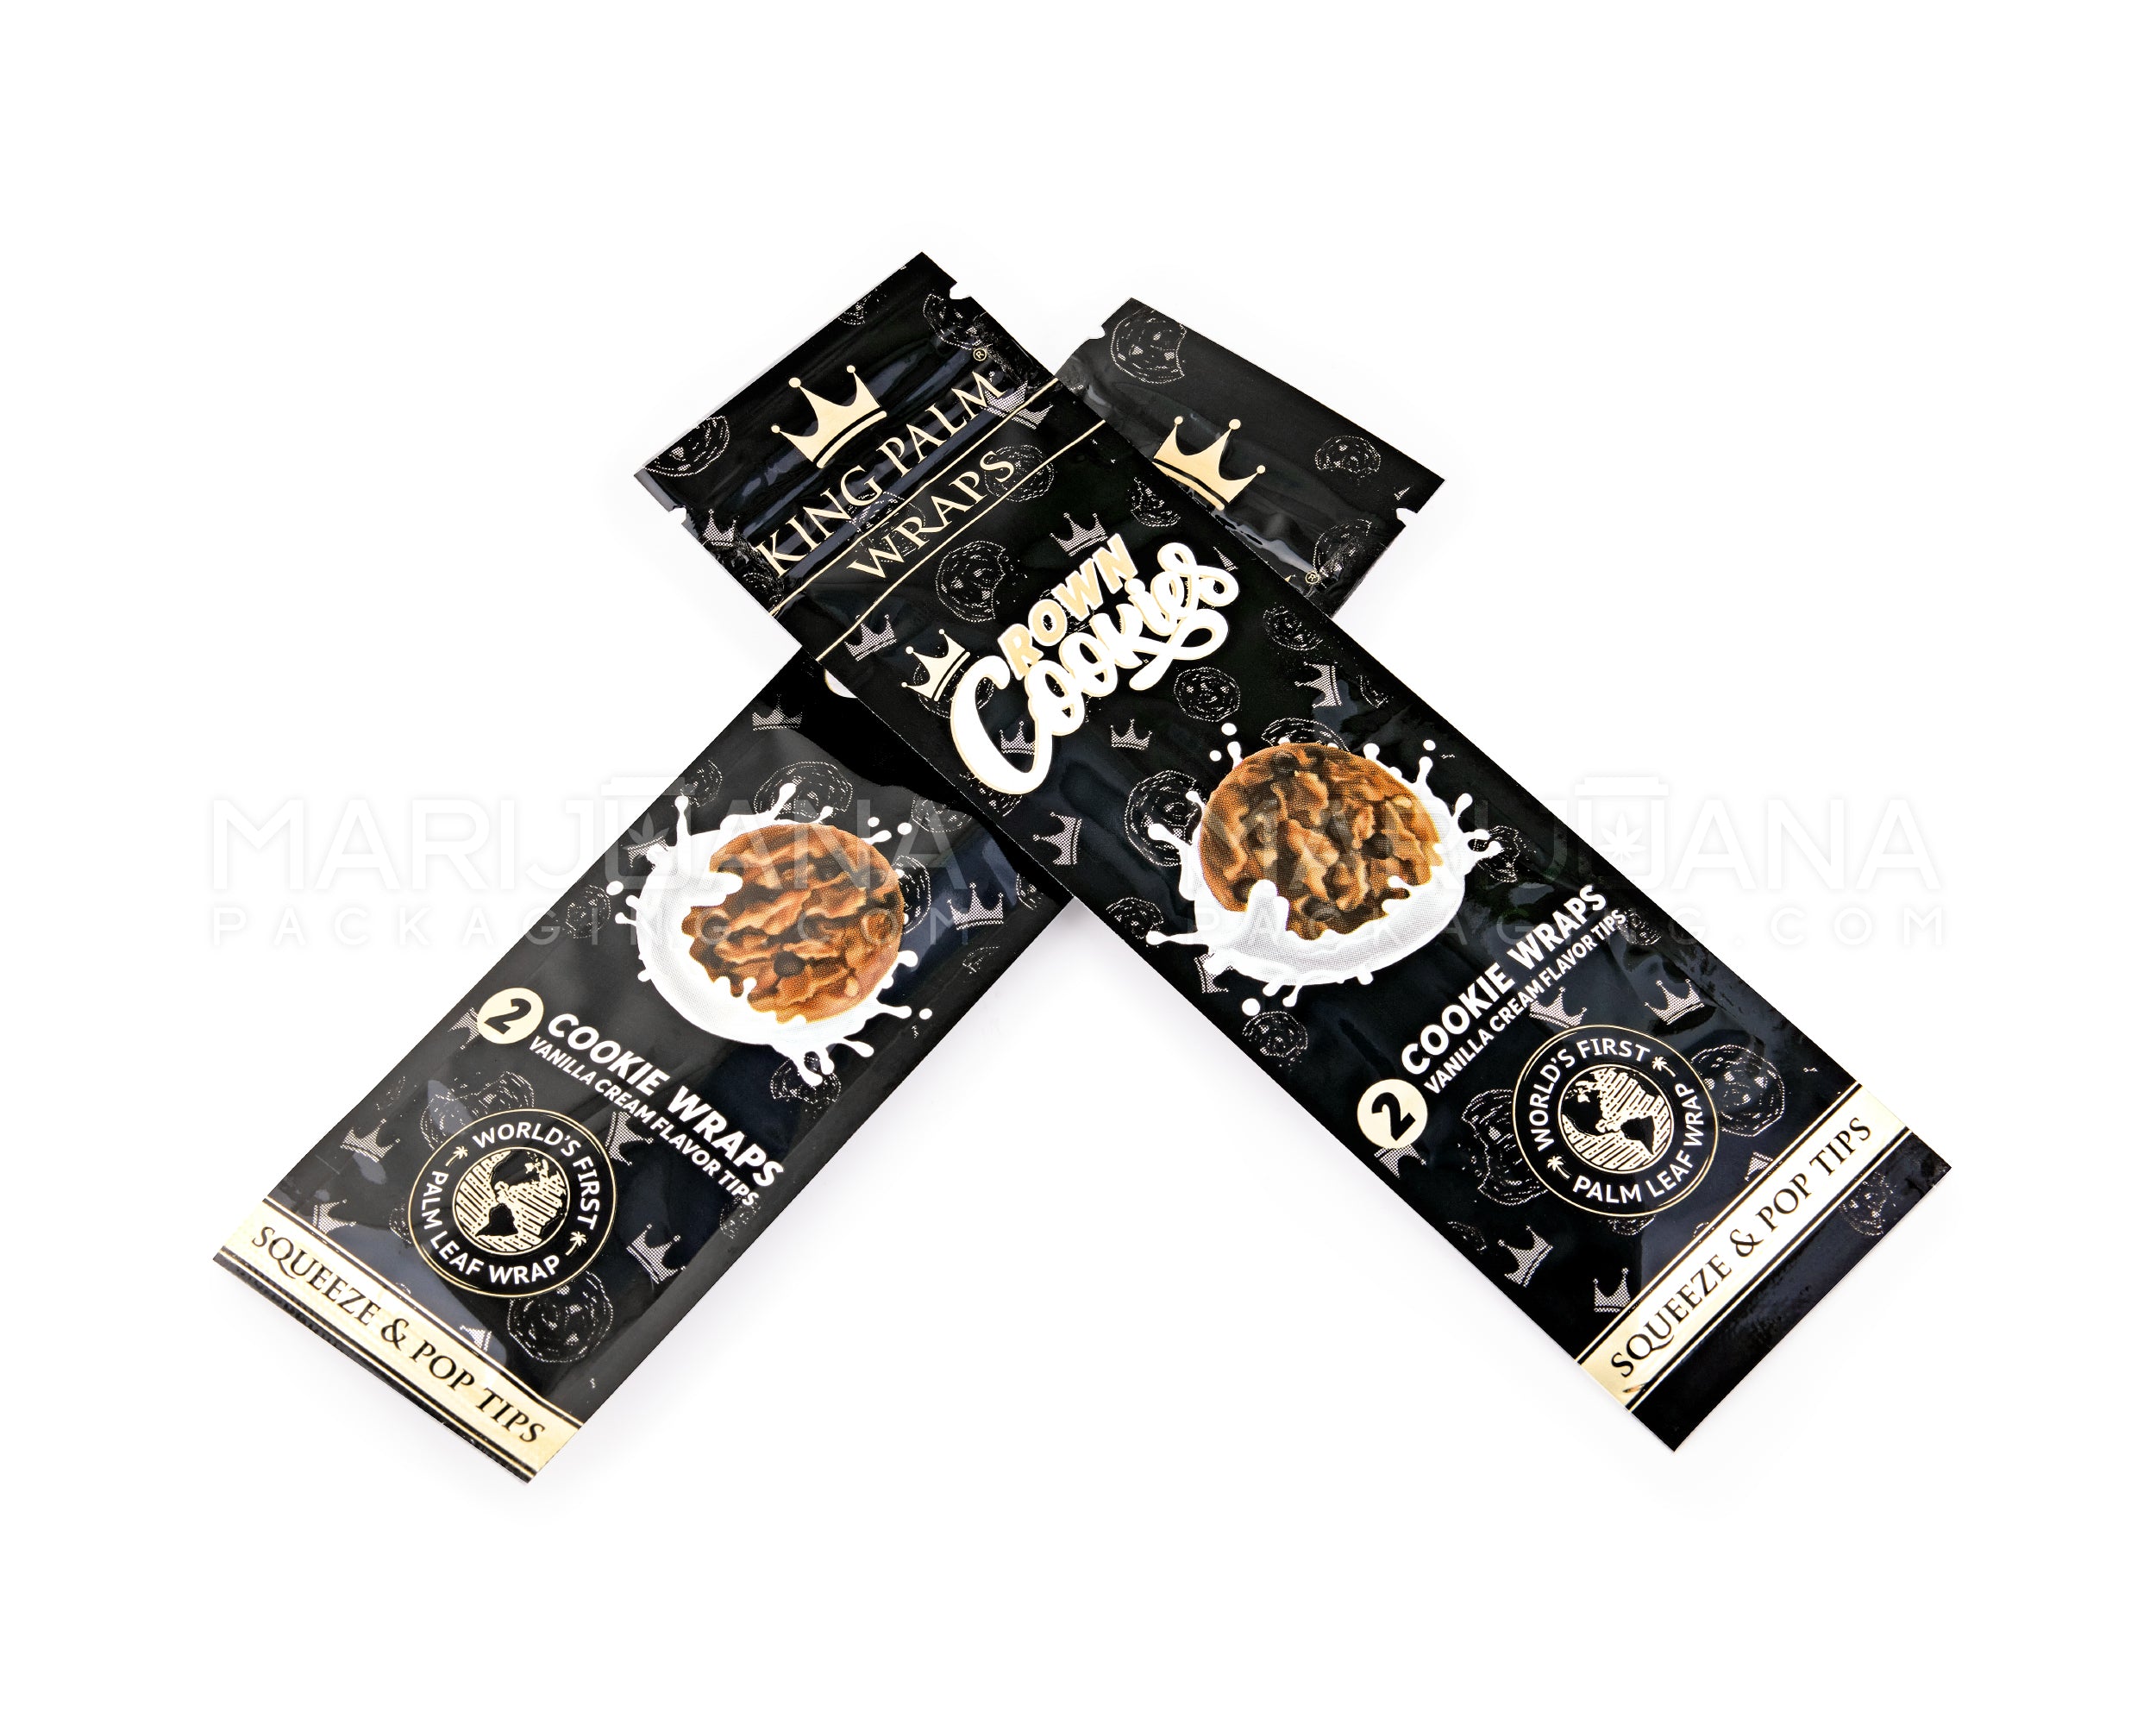 2 Crown Cookies Flavored Palm Blunt Wraps & Flavored Filters